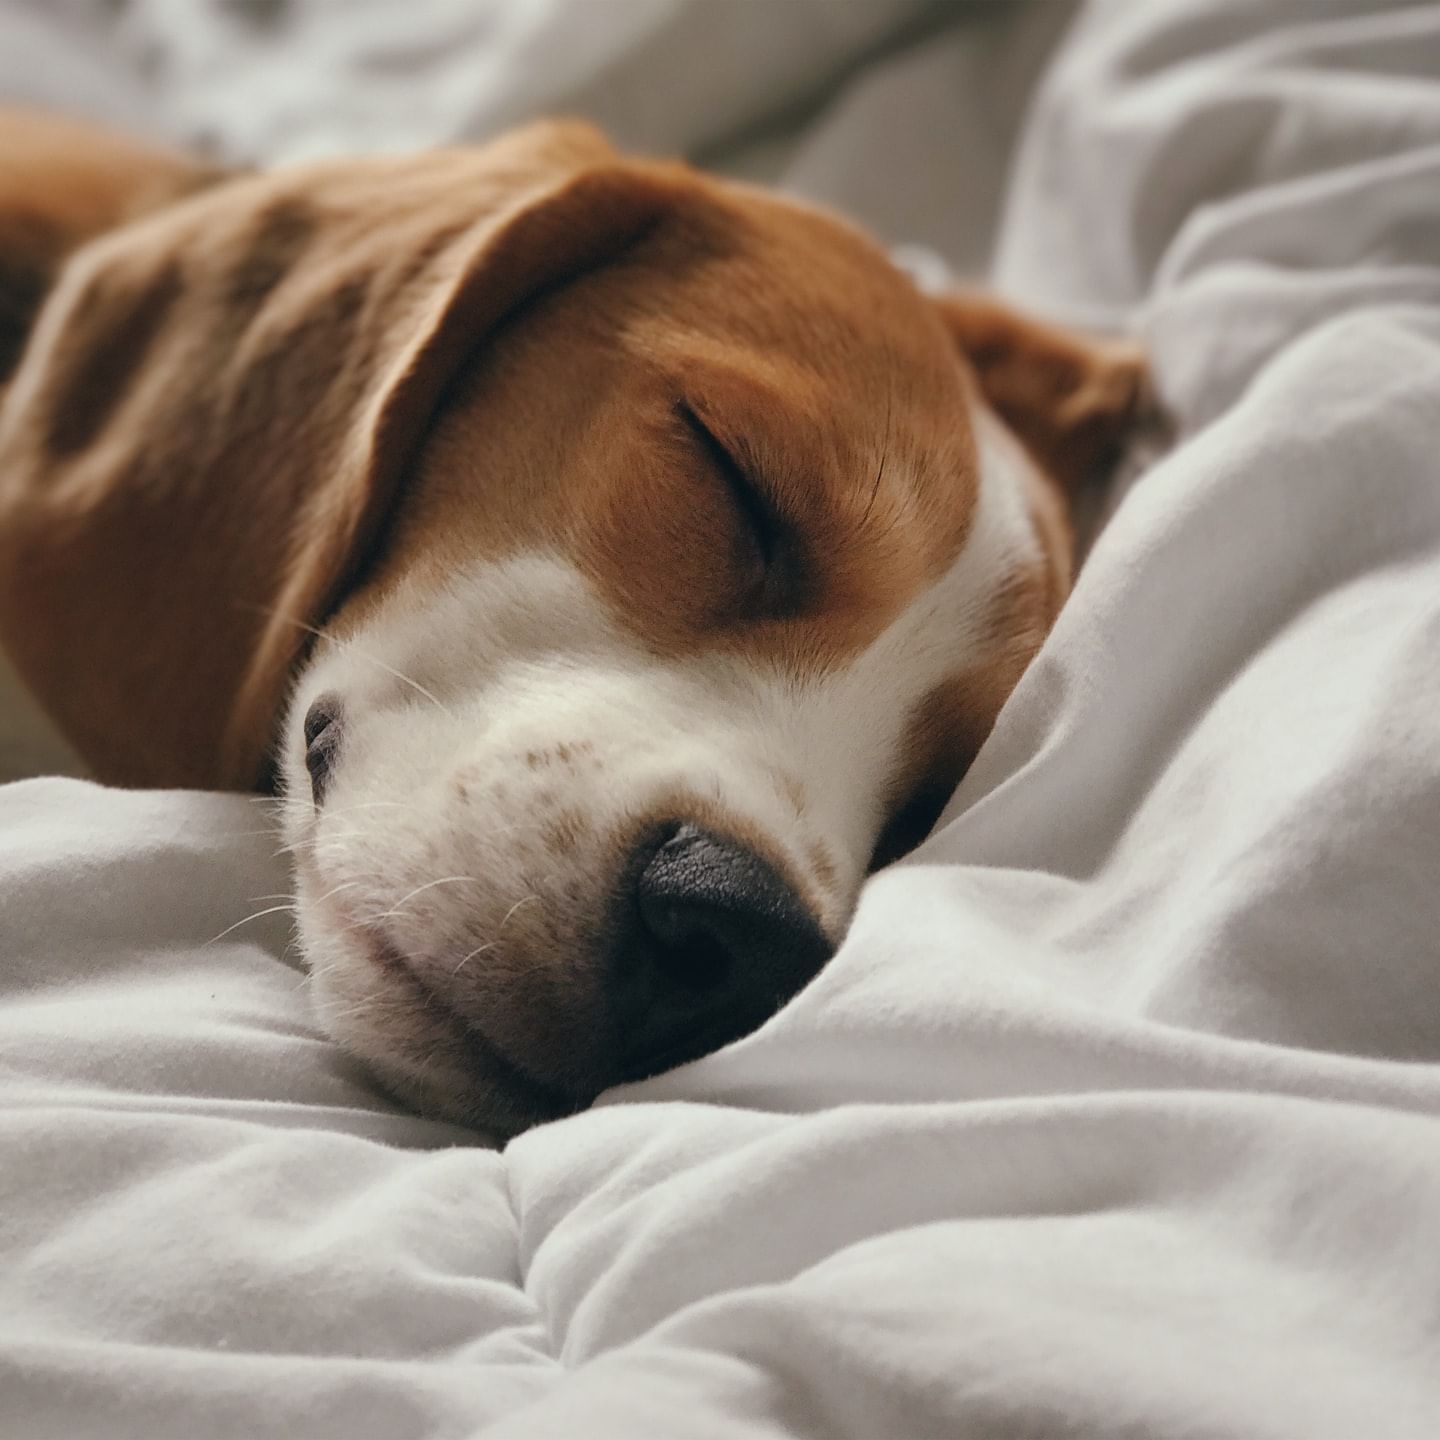 A closeup picture of a dog sleeping on a bed